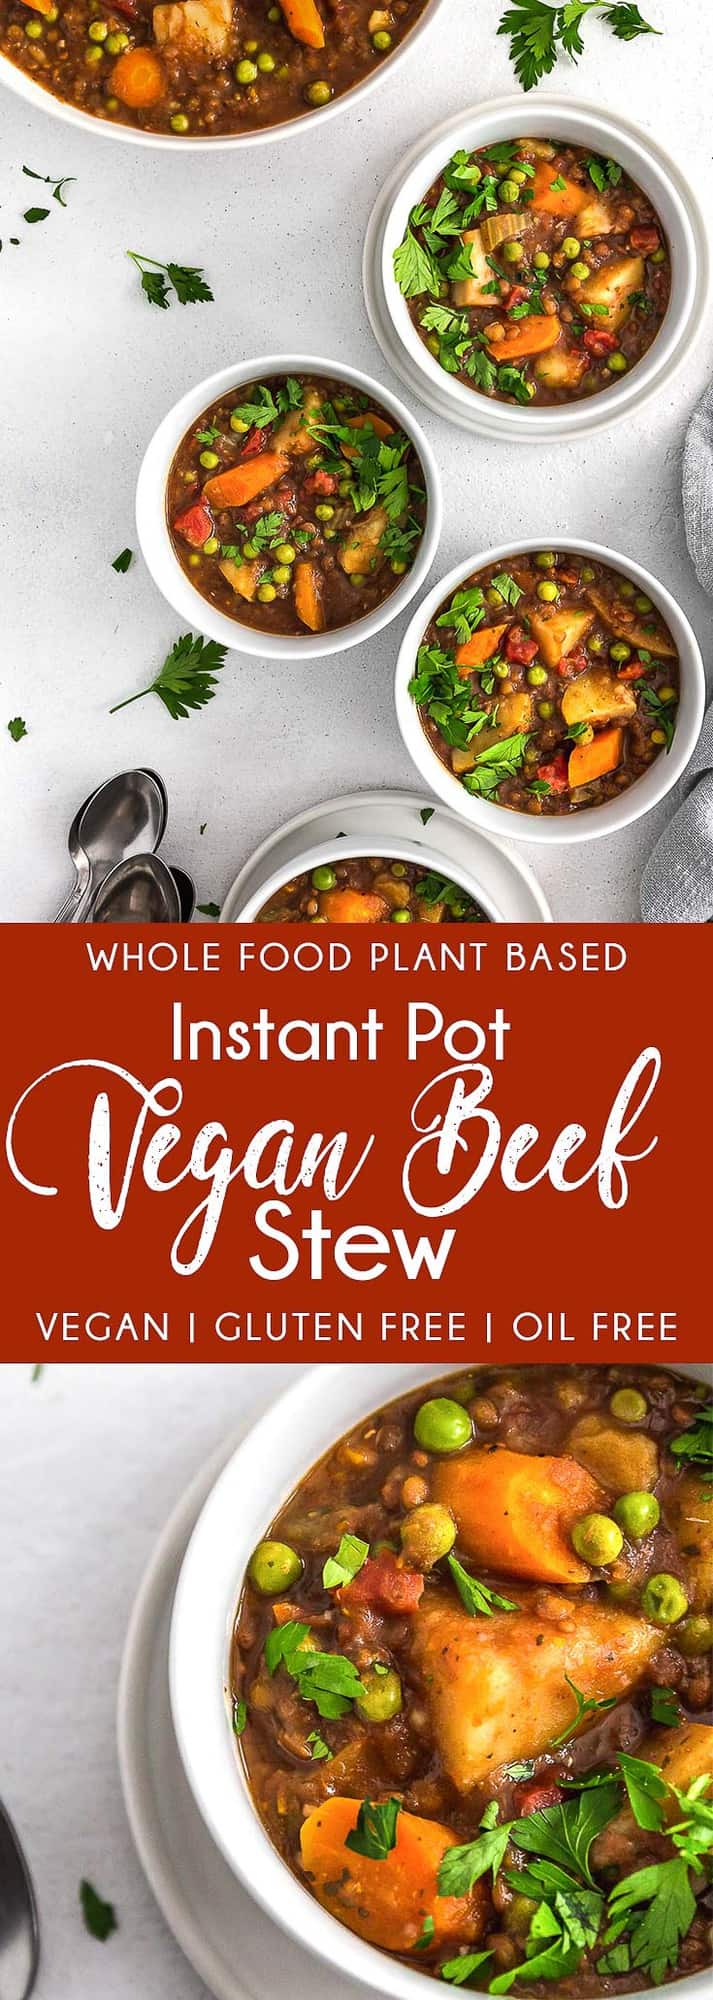 Instant Pot Beef Stew, plant based, vegan, vegetarian, whole food plant based, gluten free, recipe, wfpb, healthy, healthy vegan, oil free, no refined sugar, no oil, refined sugar free, dairy free, lentils, stew, dinner, Instant Pot